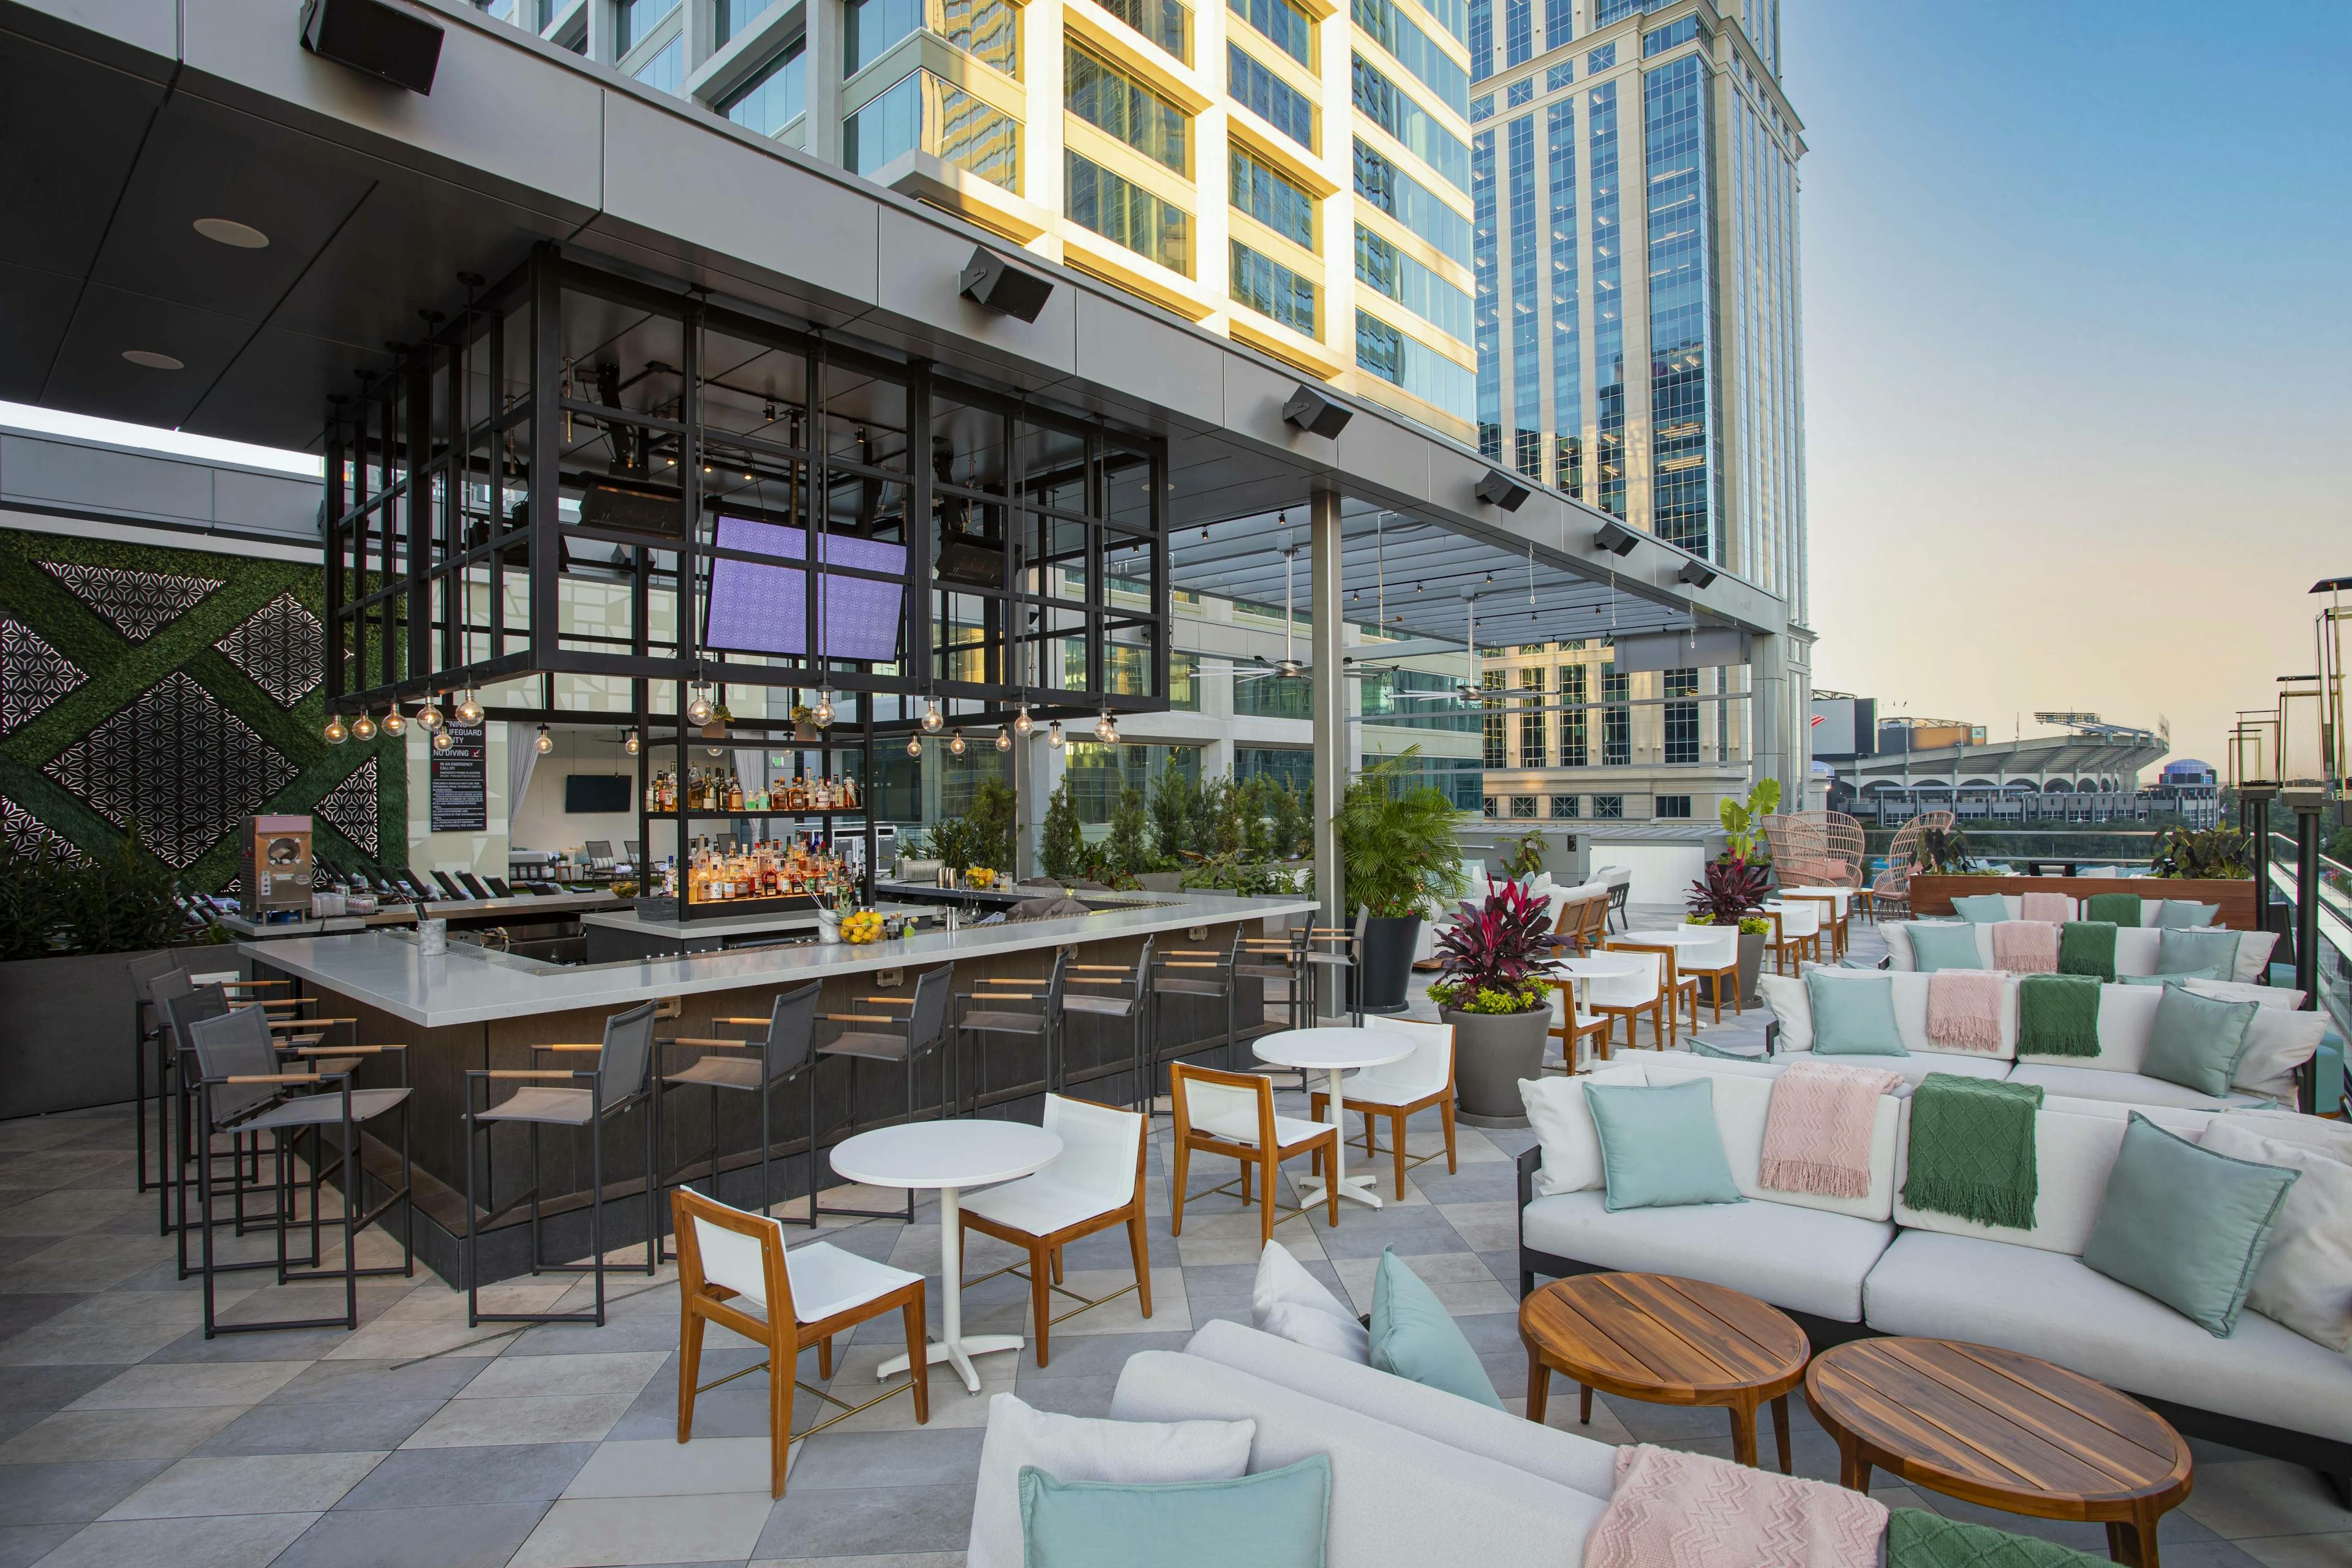 Rooftop bar with couches and tables and the bar itself in the middle